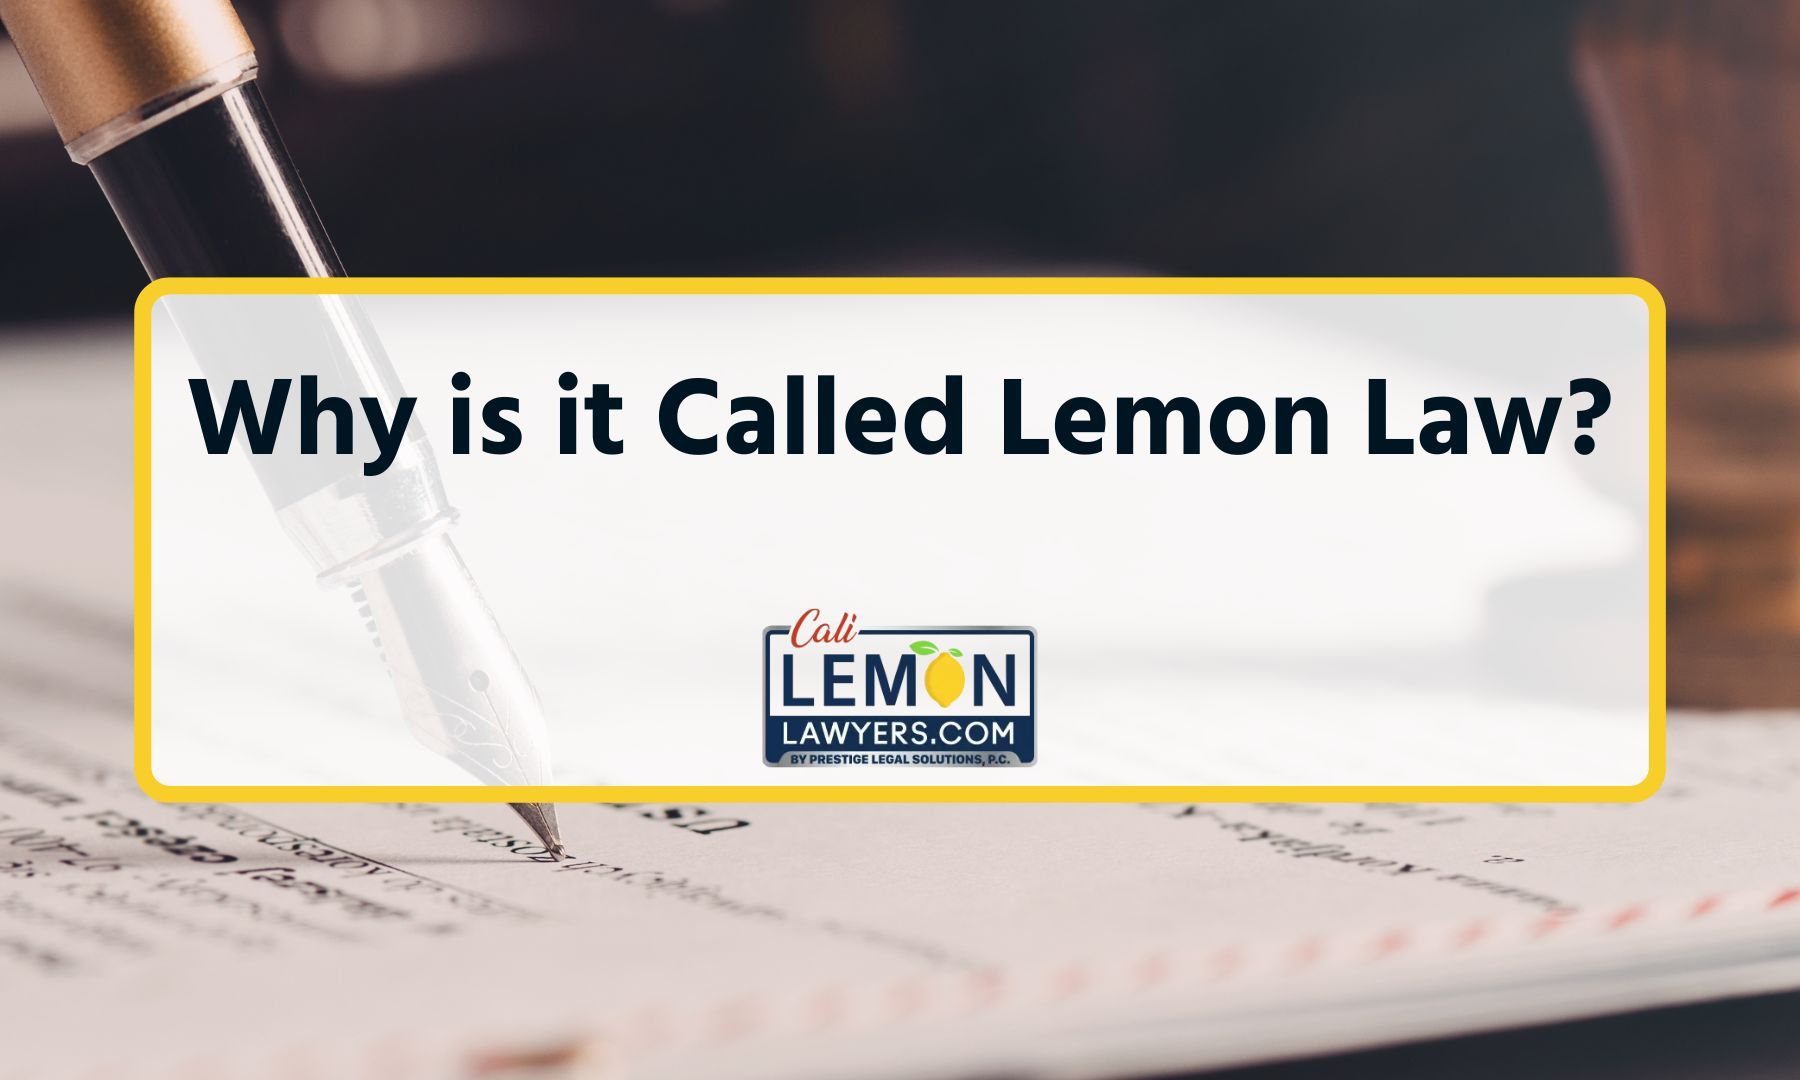 Why is it Called Lemon Law?